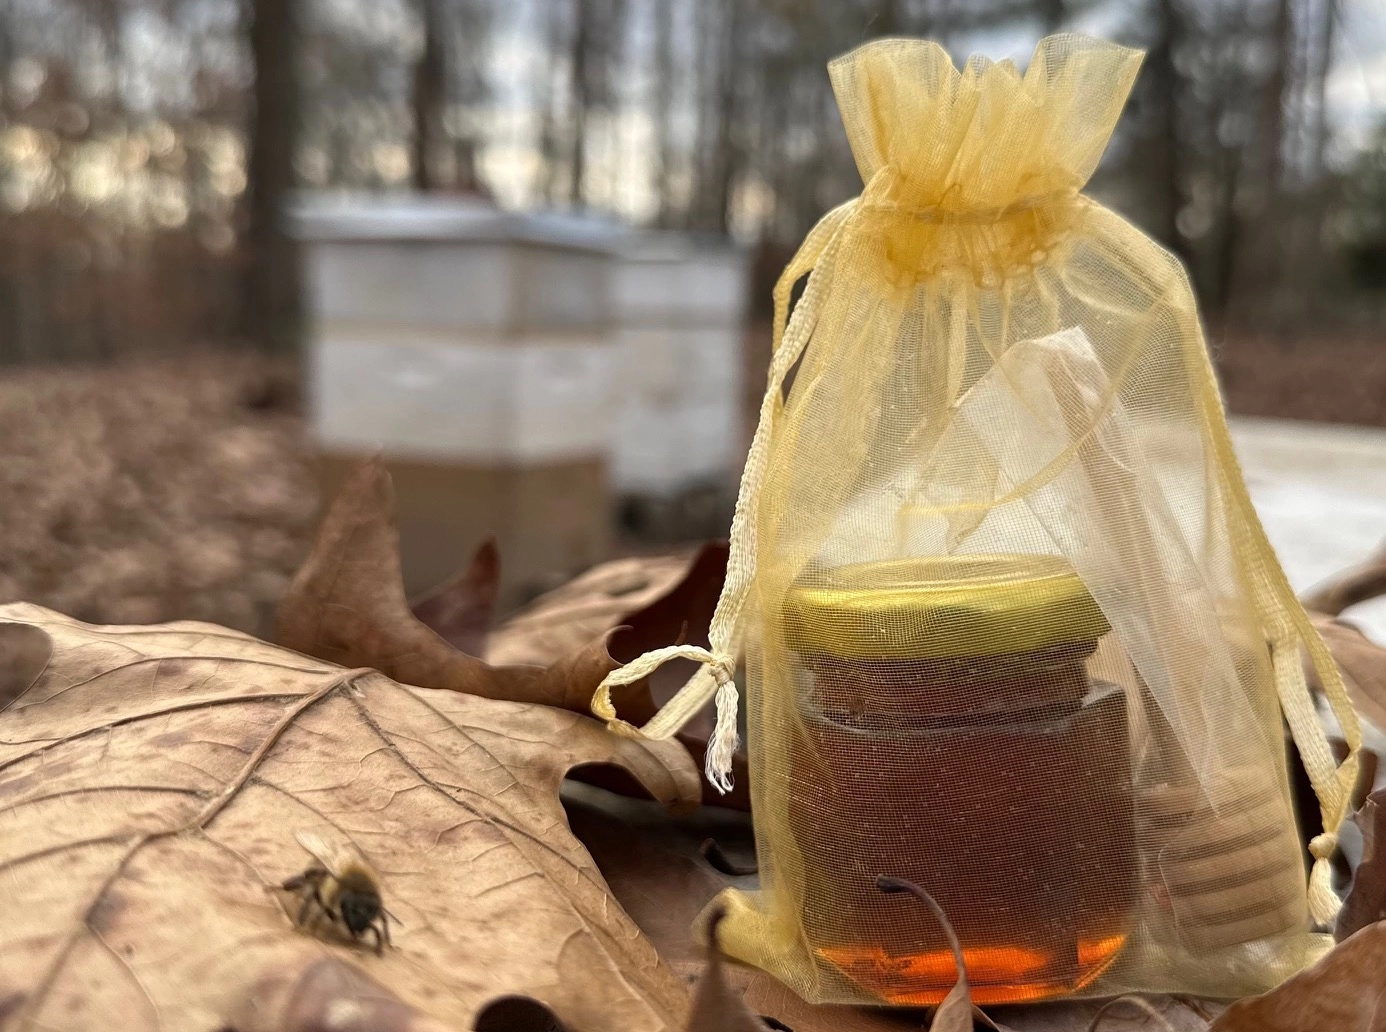 15-oz-raw-honey-with-dipper-in-a-decorative-bag